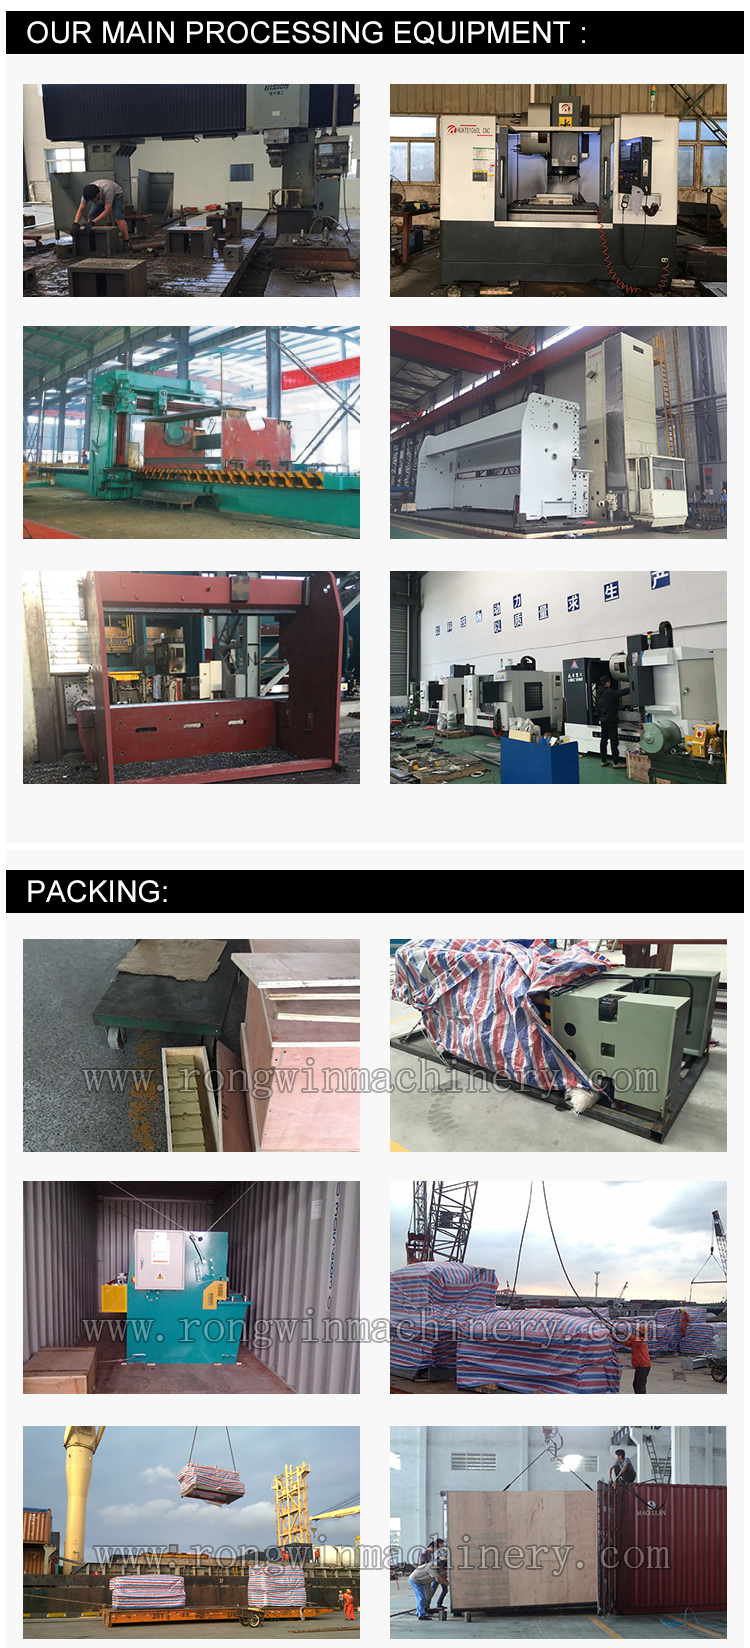 Rongwin buy laser cutting machine with good price for sheet metal working-23